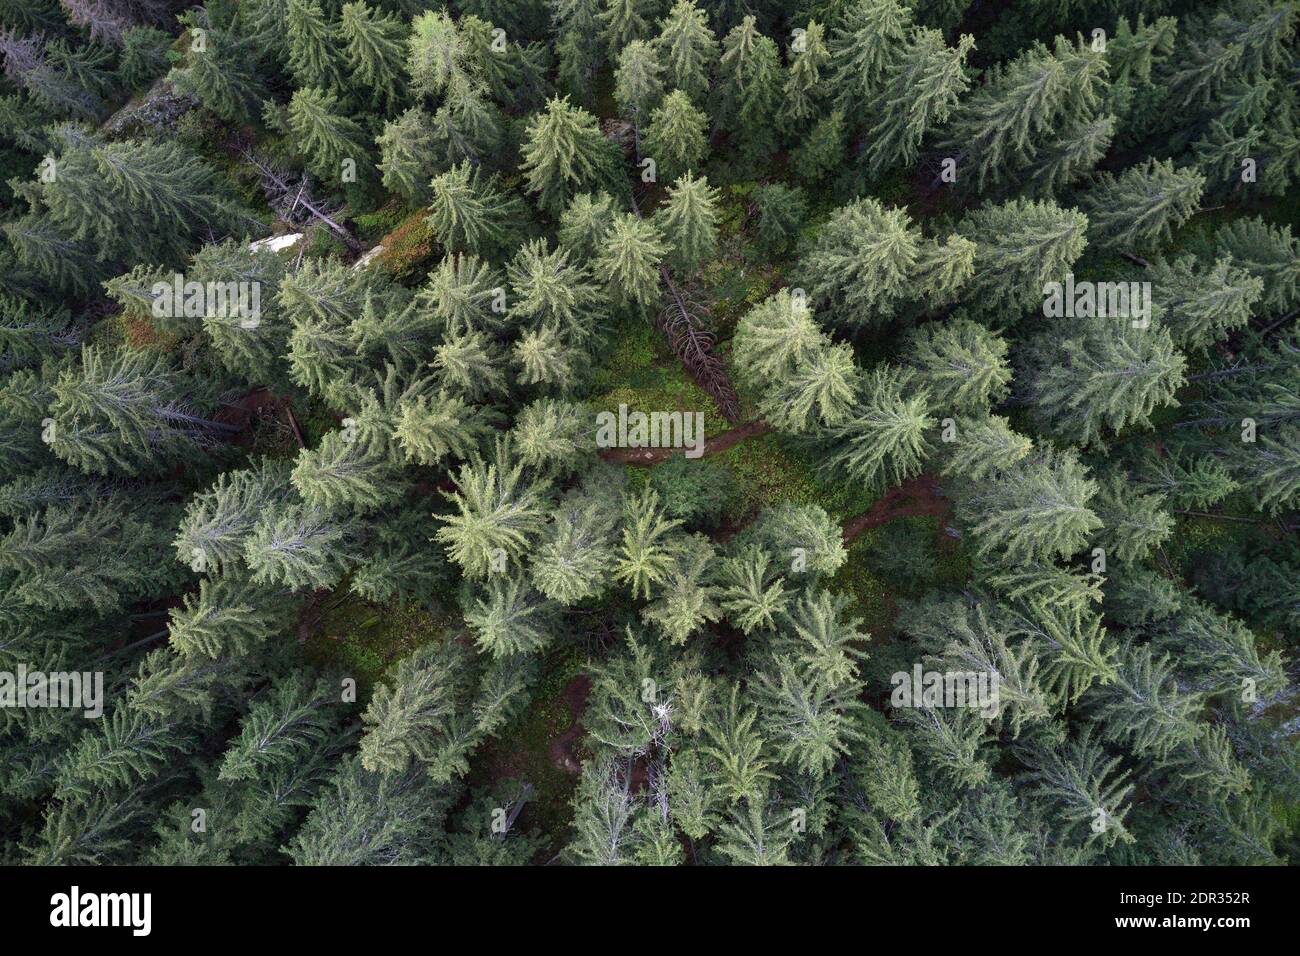 Aerial drone view of a mountainous old Pine tree forest landscape with a winding hiking trail through it. Stock Photo